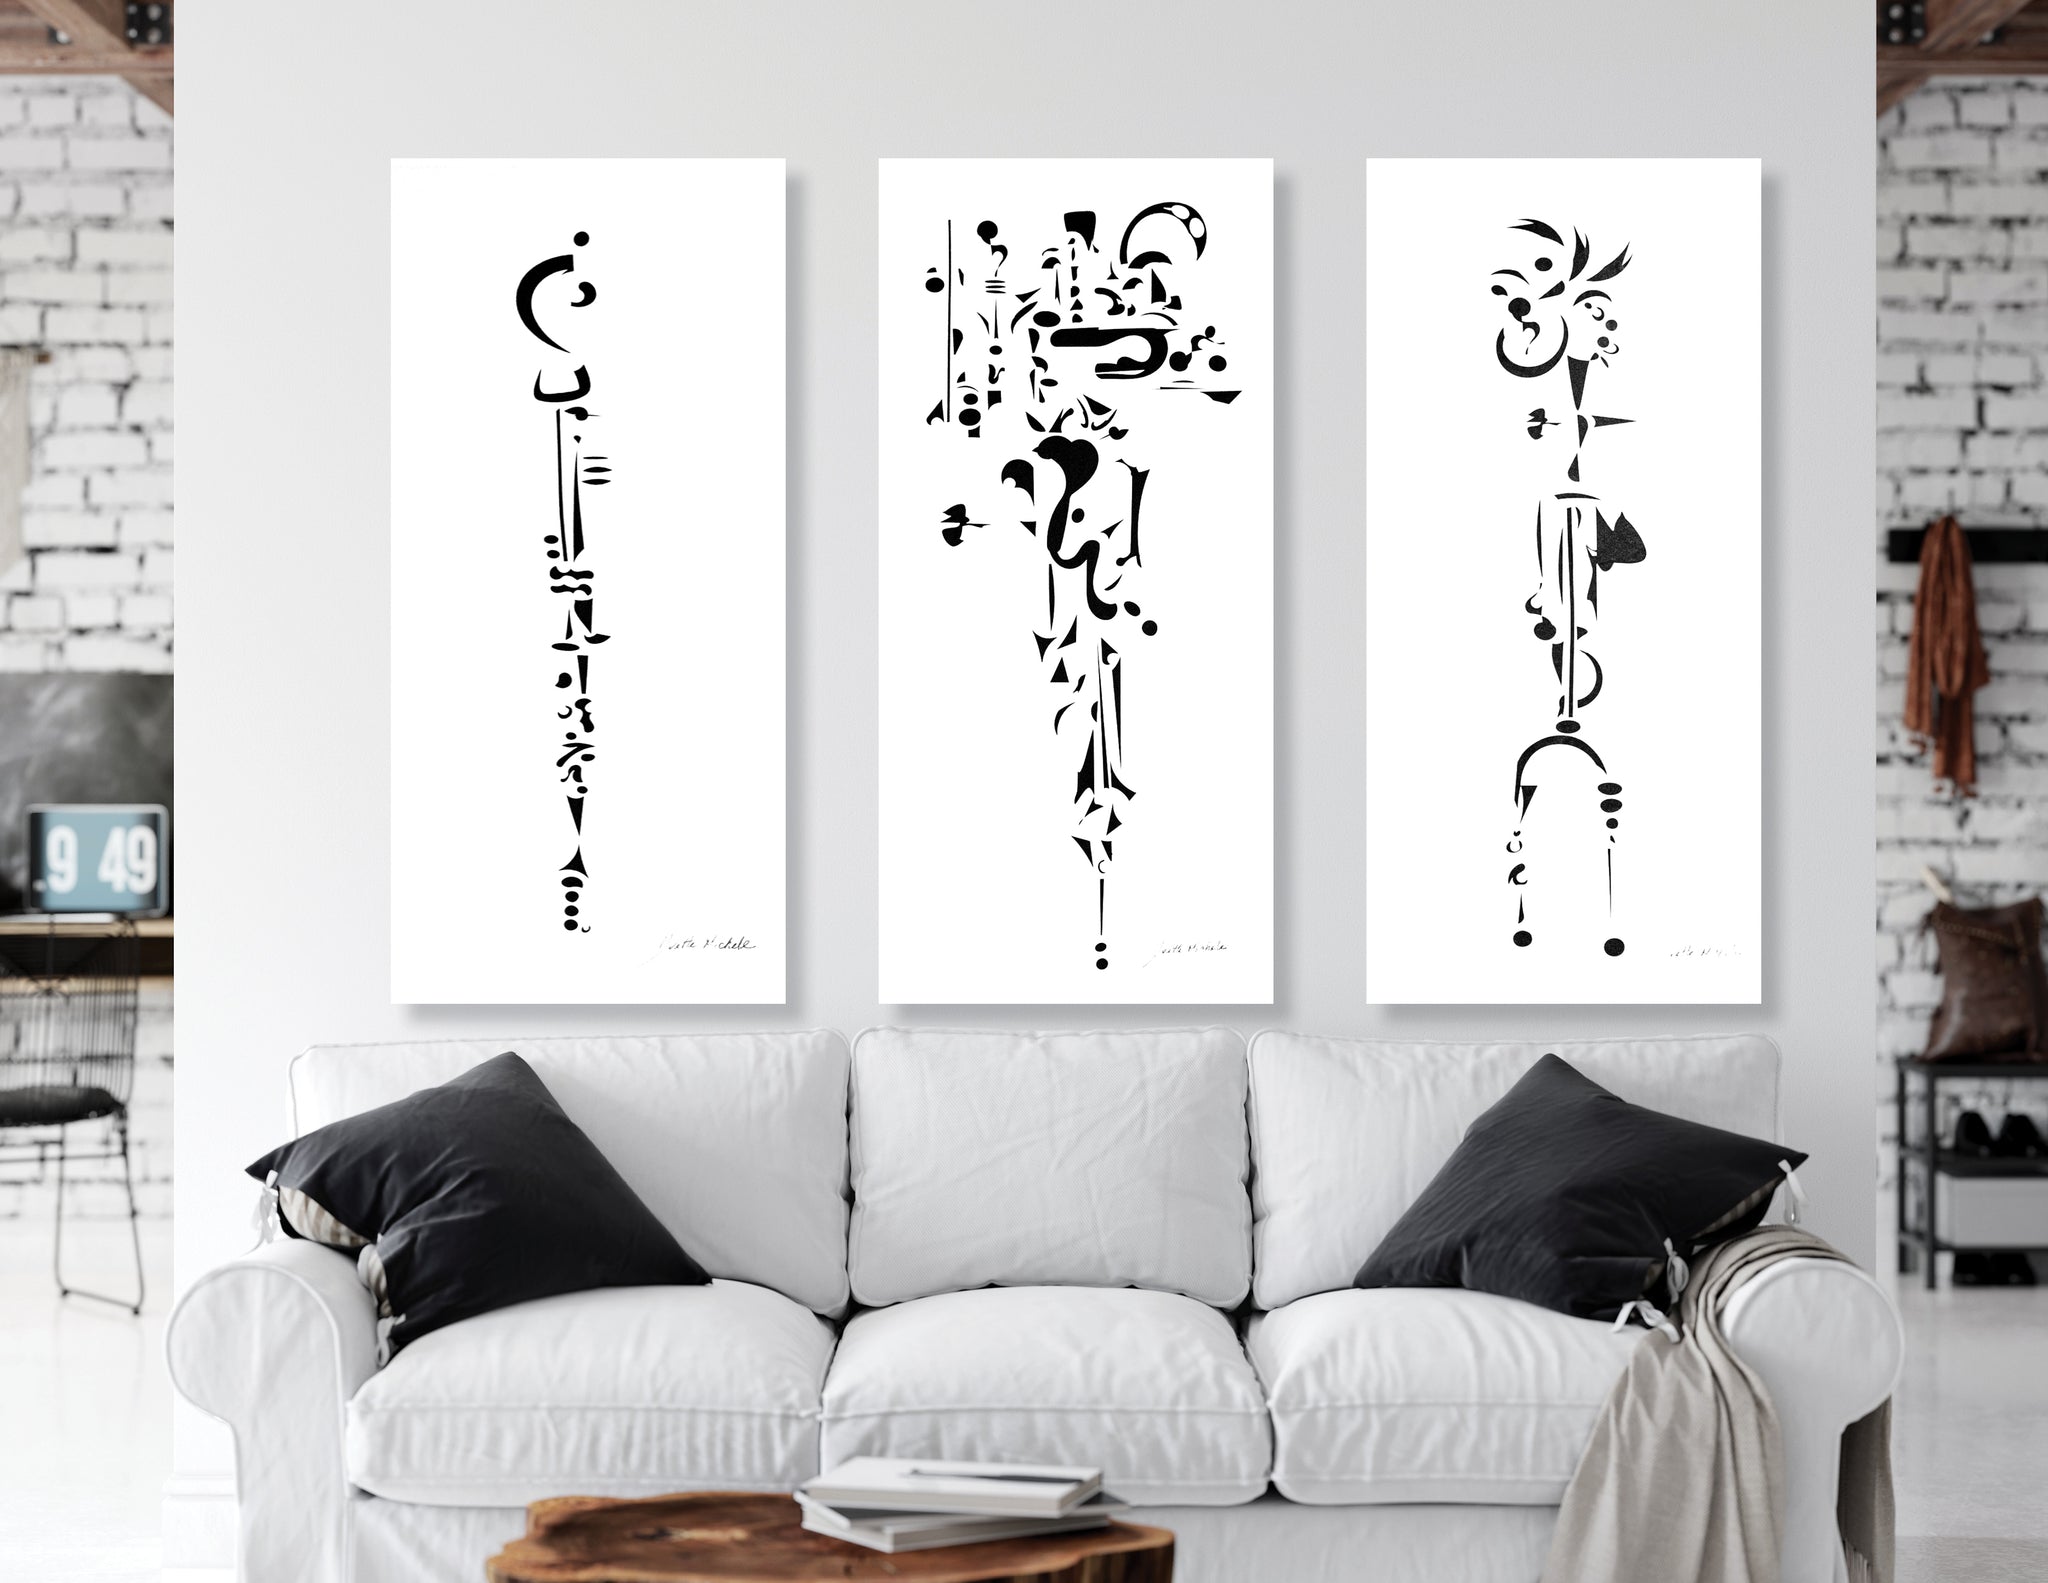 Sumerians in Silhouettes - Abstract black and white art